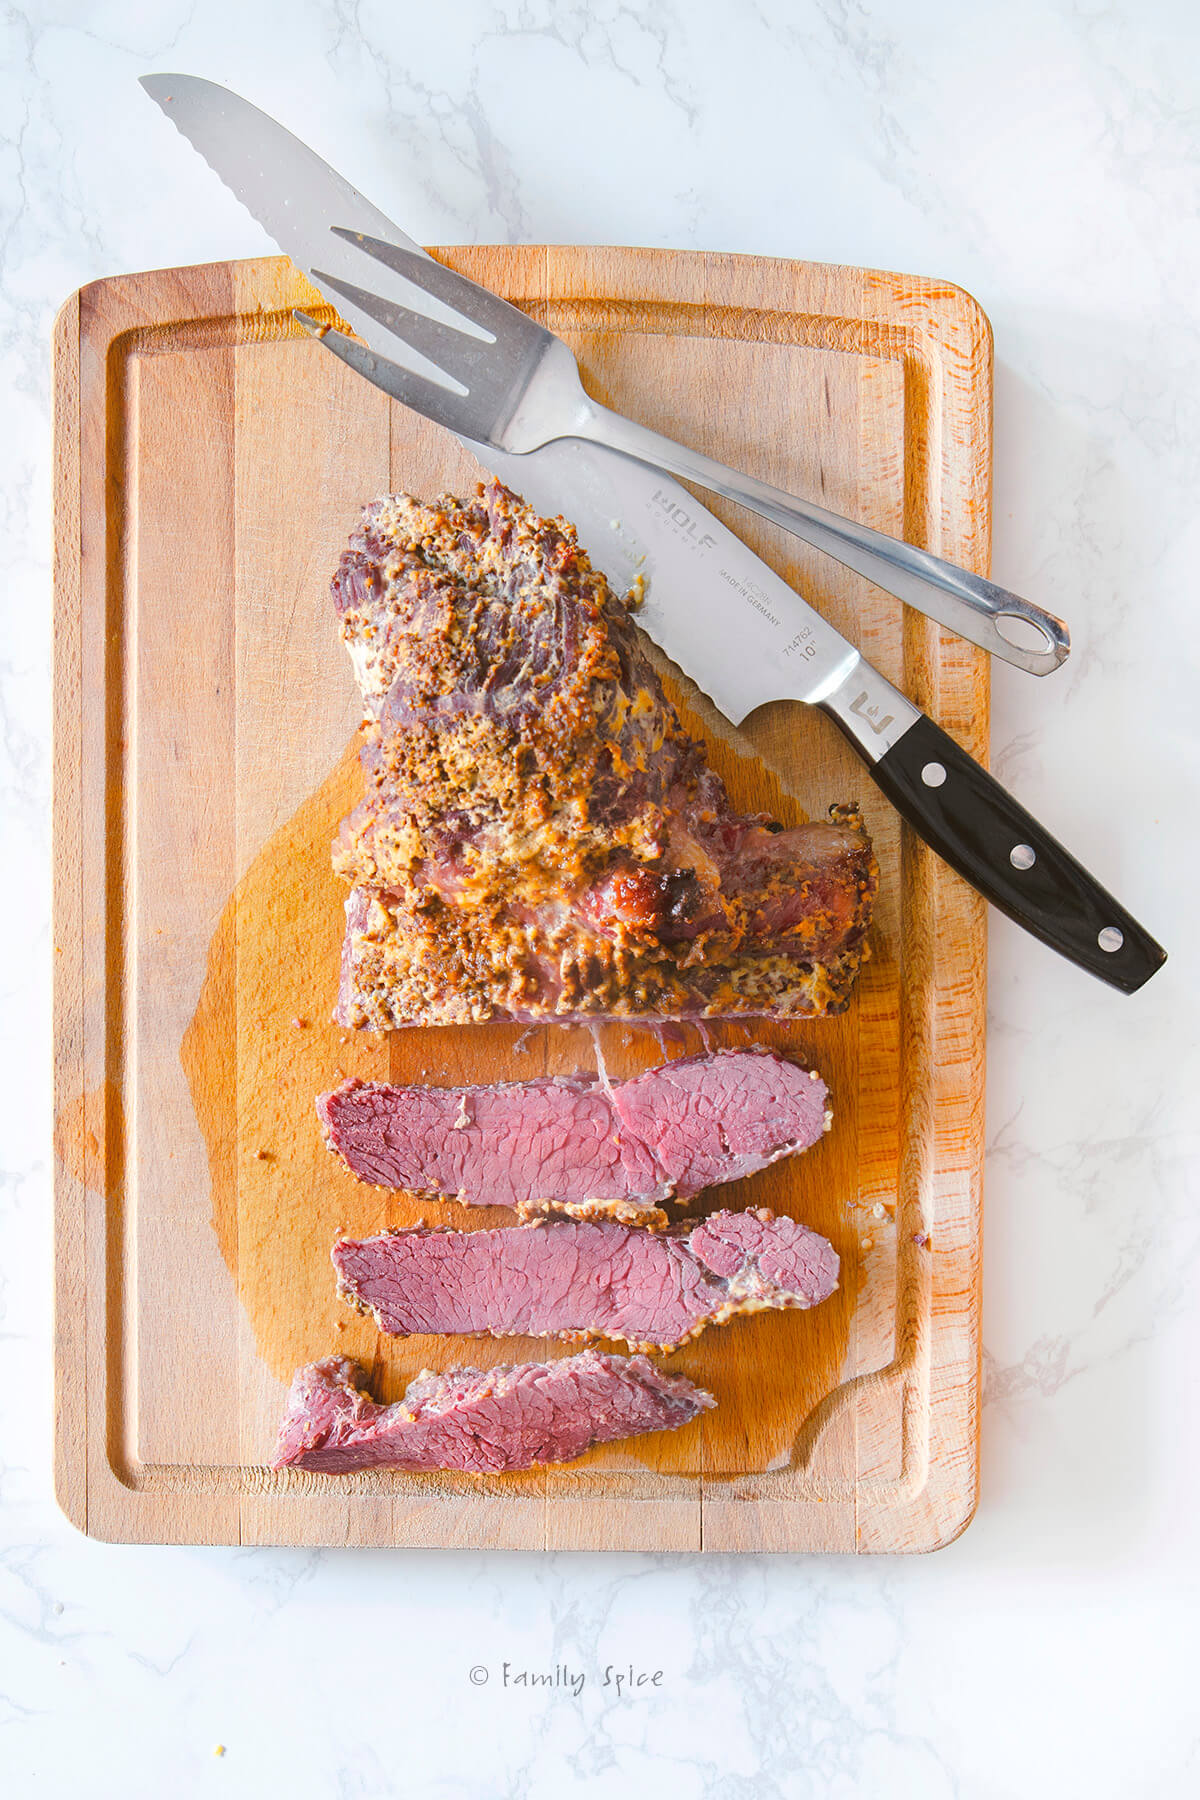 A baked corned beef brisket on a cutting board with a knife and fork and slices of meat